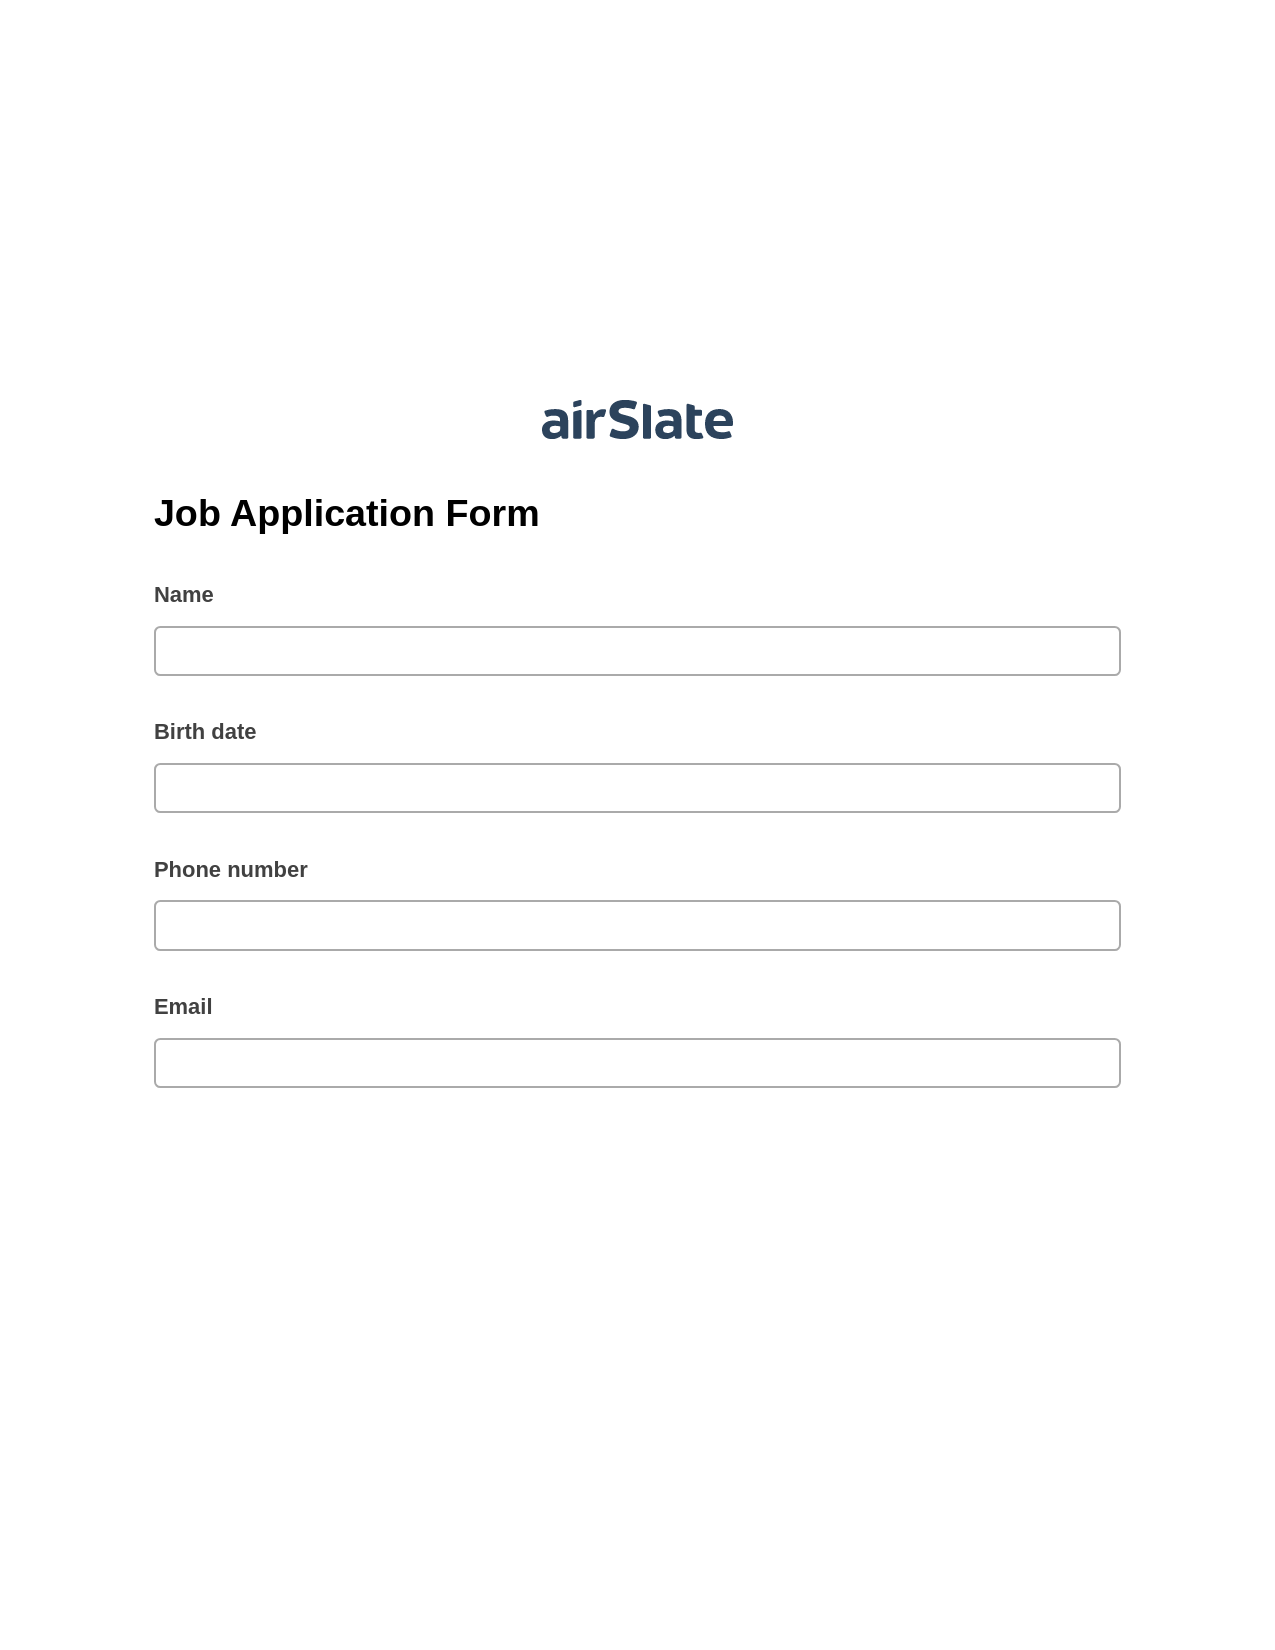 Job Application Form Pre-fill Dropdown from Airtable, Create MS Dynamics 365 Records Bot, Slack Two-Way Binding Bot